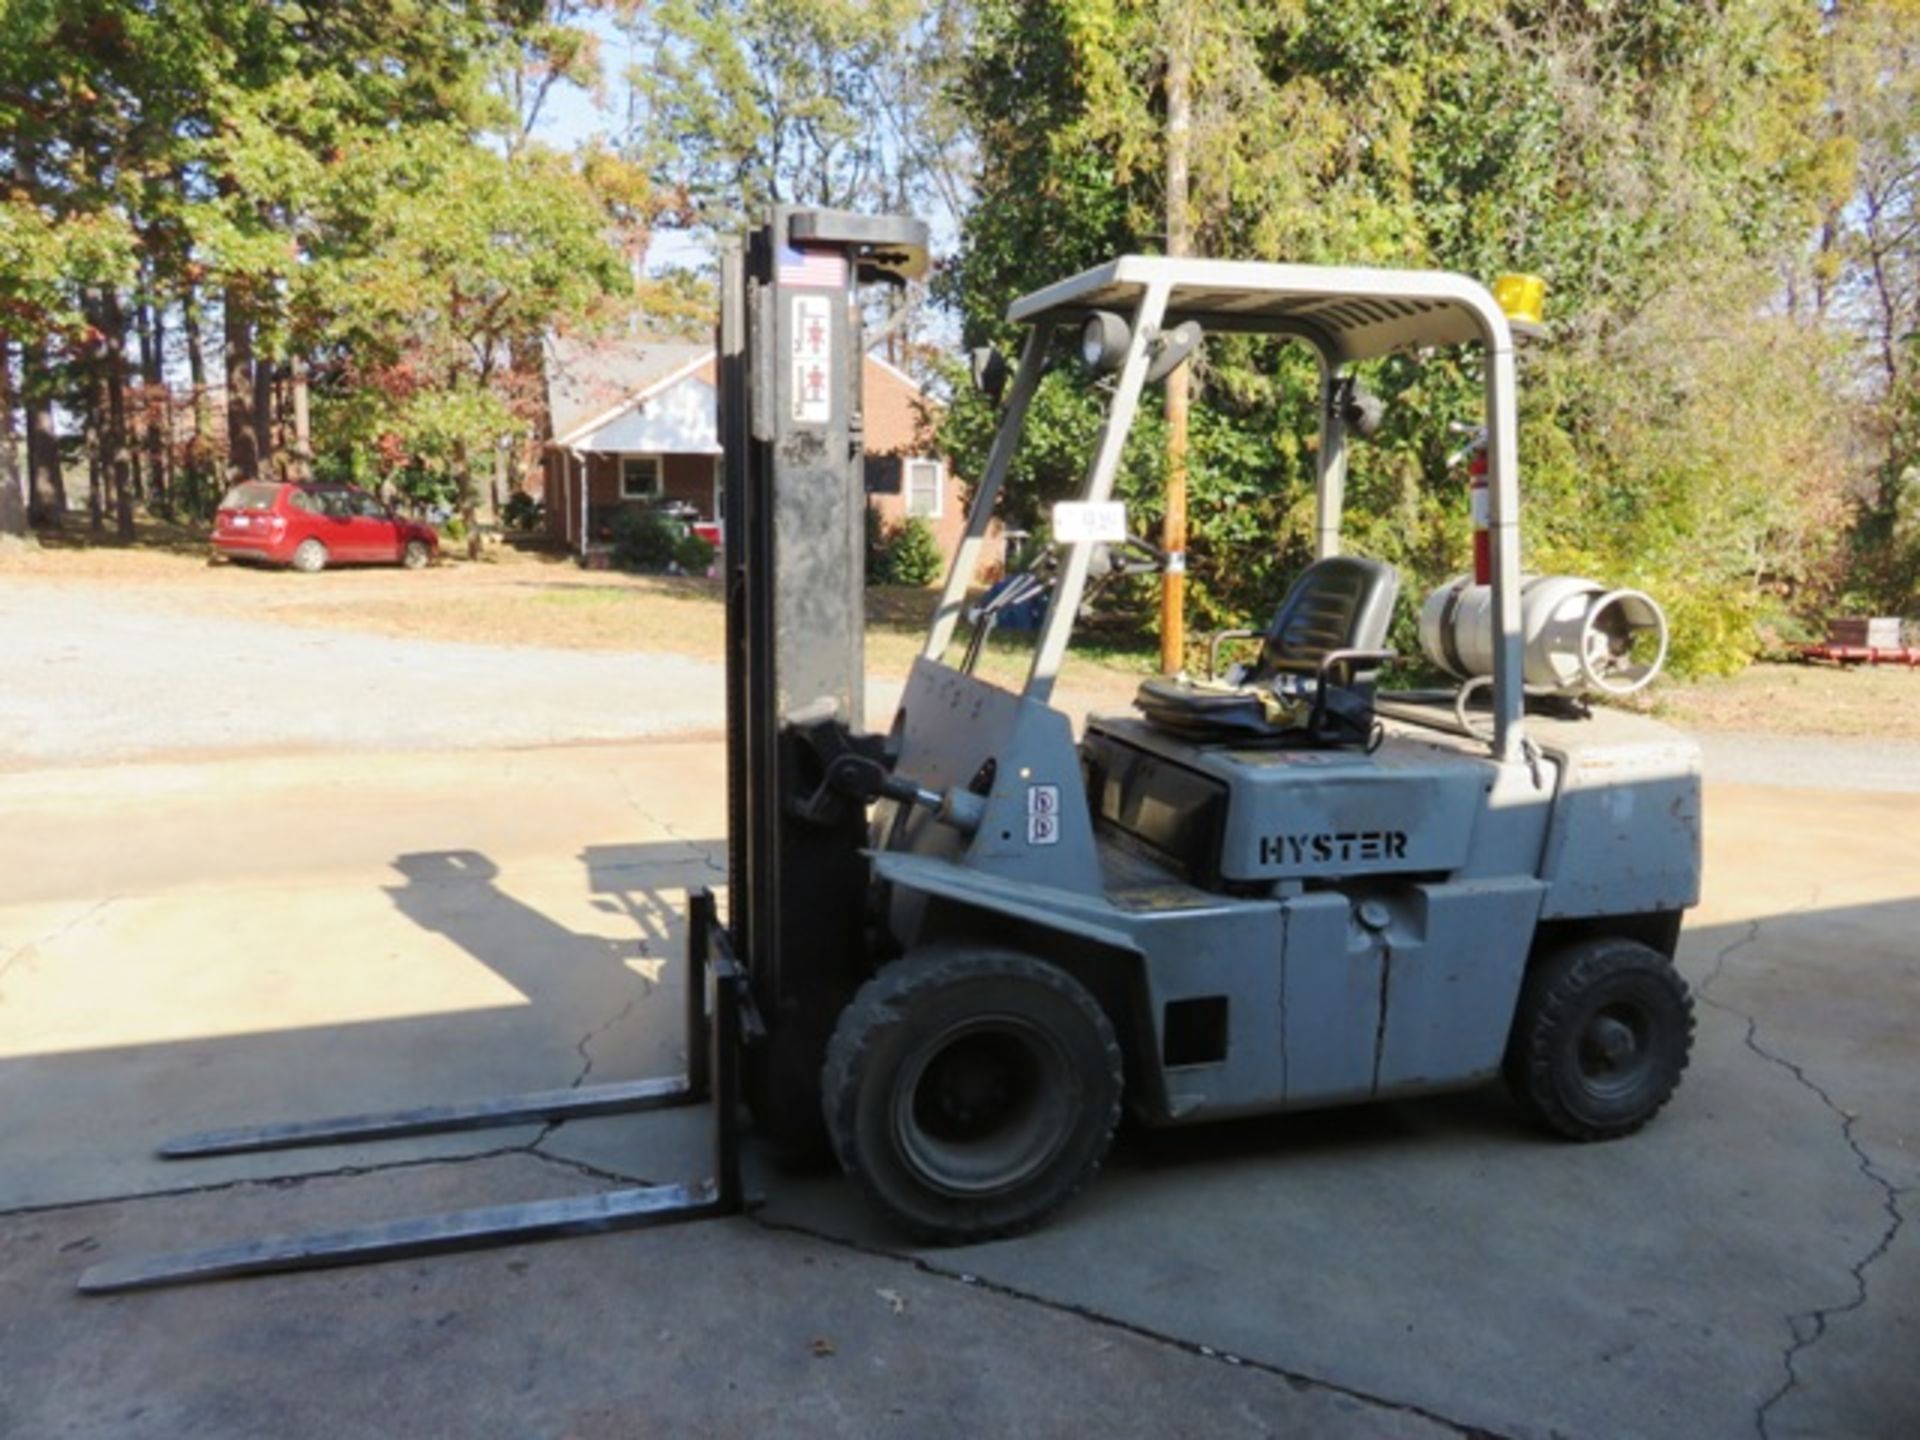 Hyster 5,400lb Capacity LP Forklift with 2-Stage Mast, Pneumatic Tires, Cage, sn:A177B20209H with